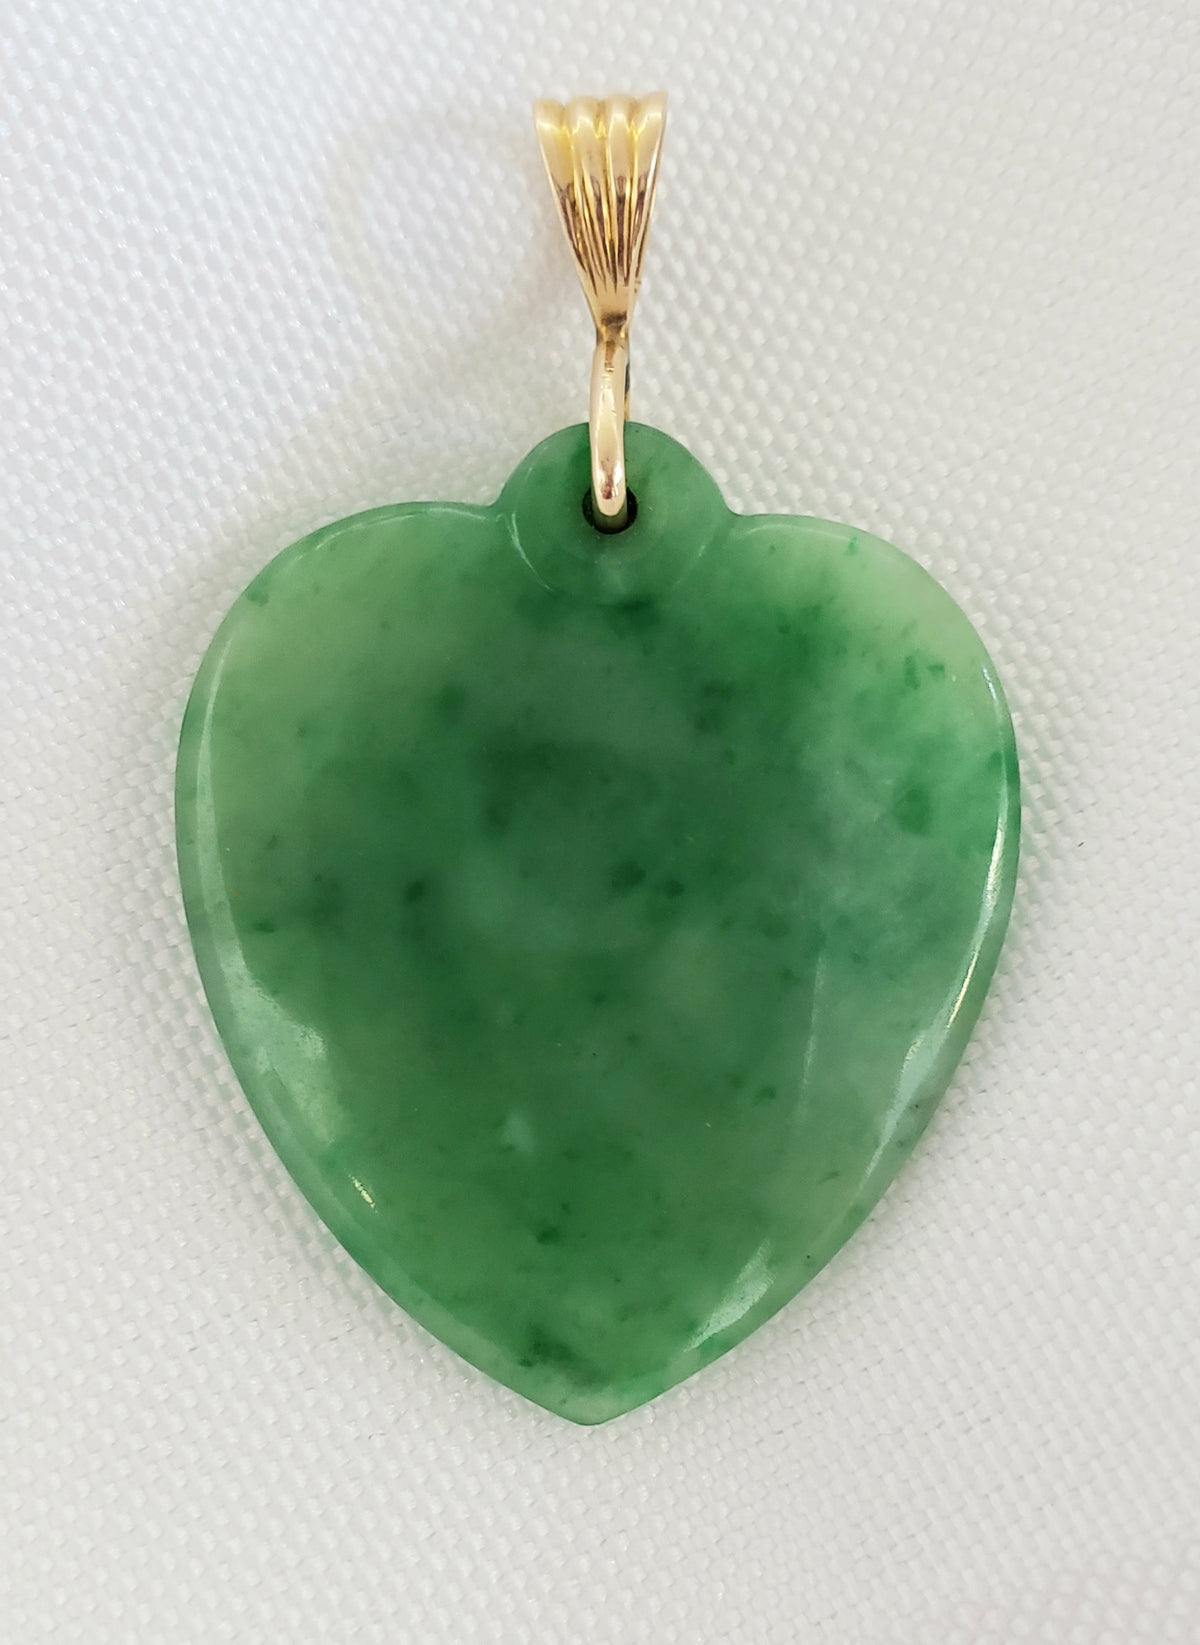 Jade, Heart Shaped Pendant, 14kt Yellow Gold (chain not included)